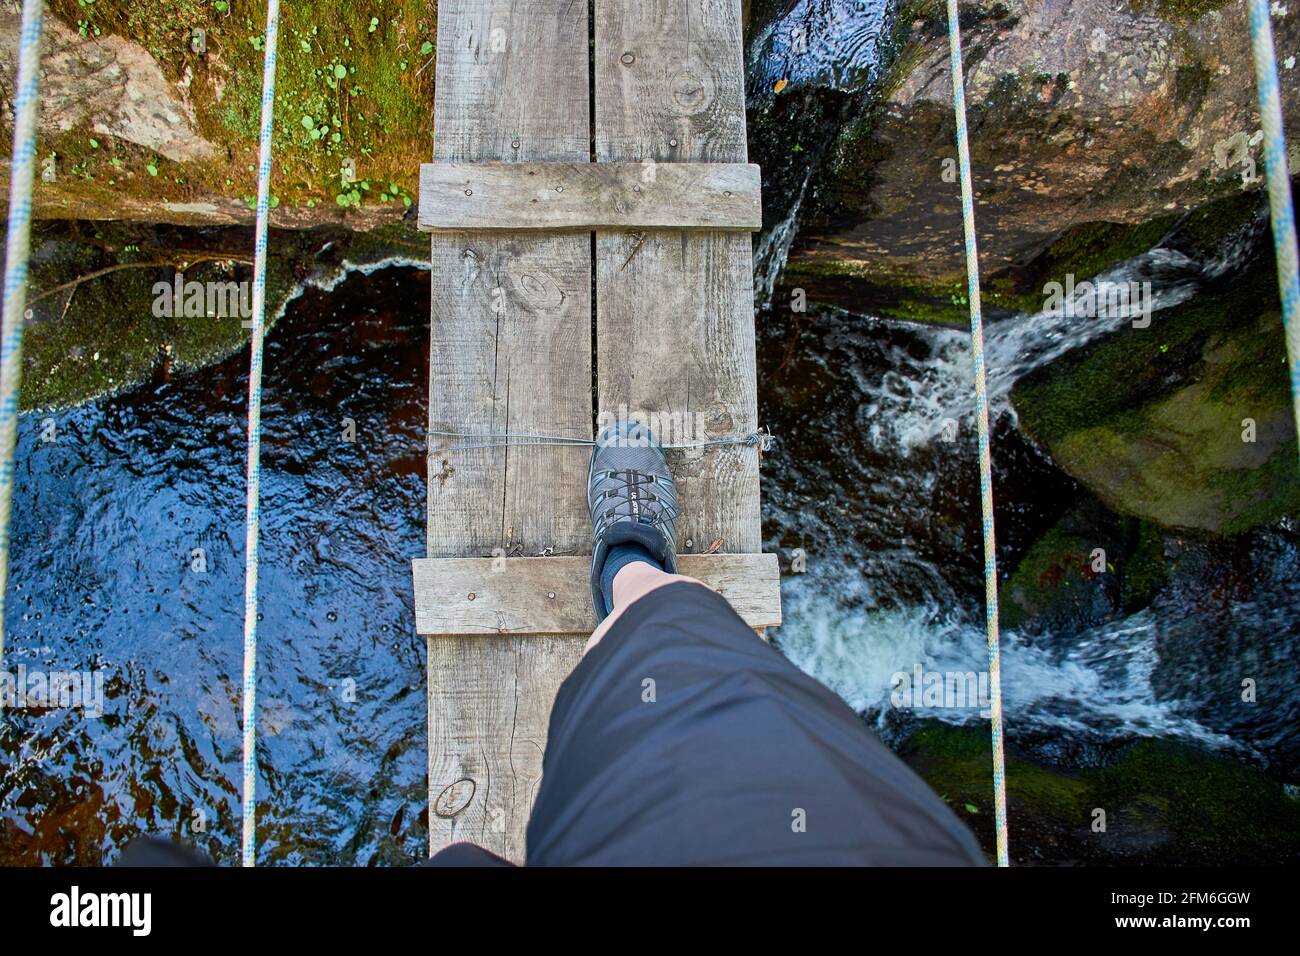 Leg of an athlete crossing a wooden bridge with ropes over a natural rock pool and waterfall. Stock Photo